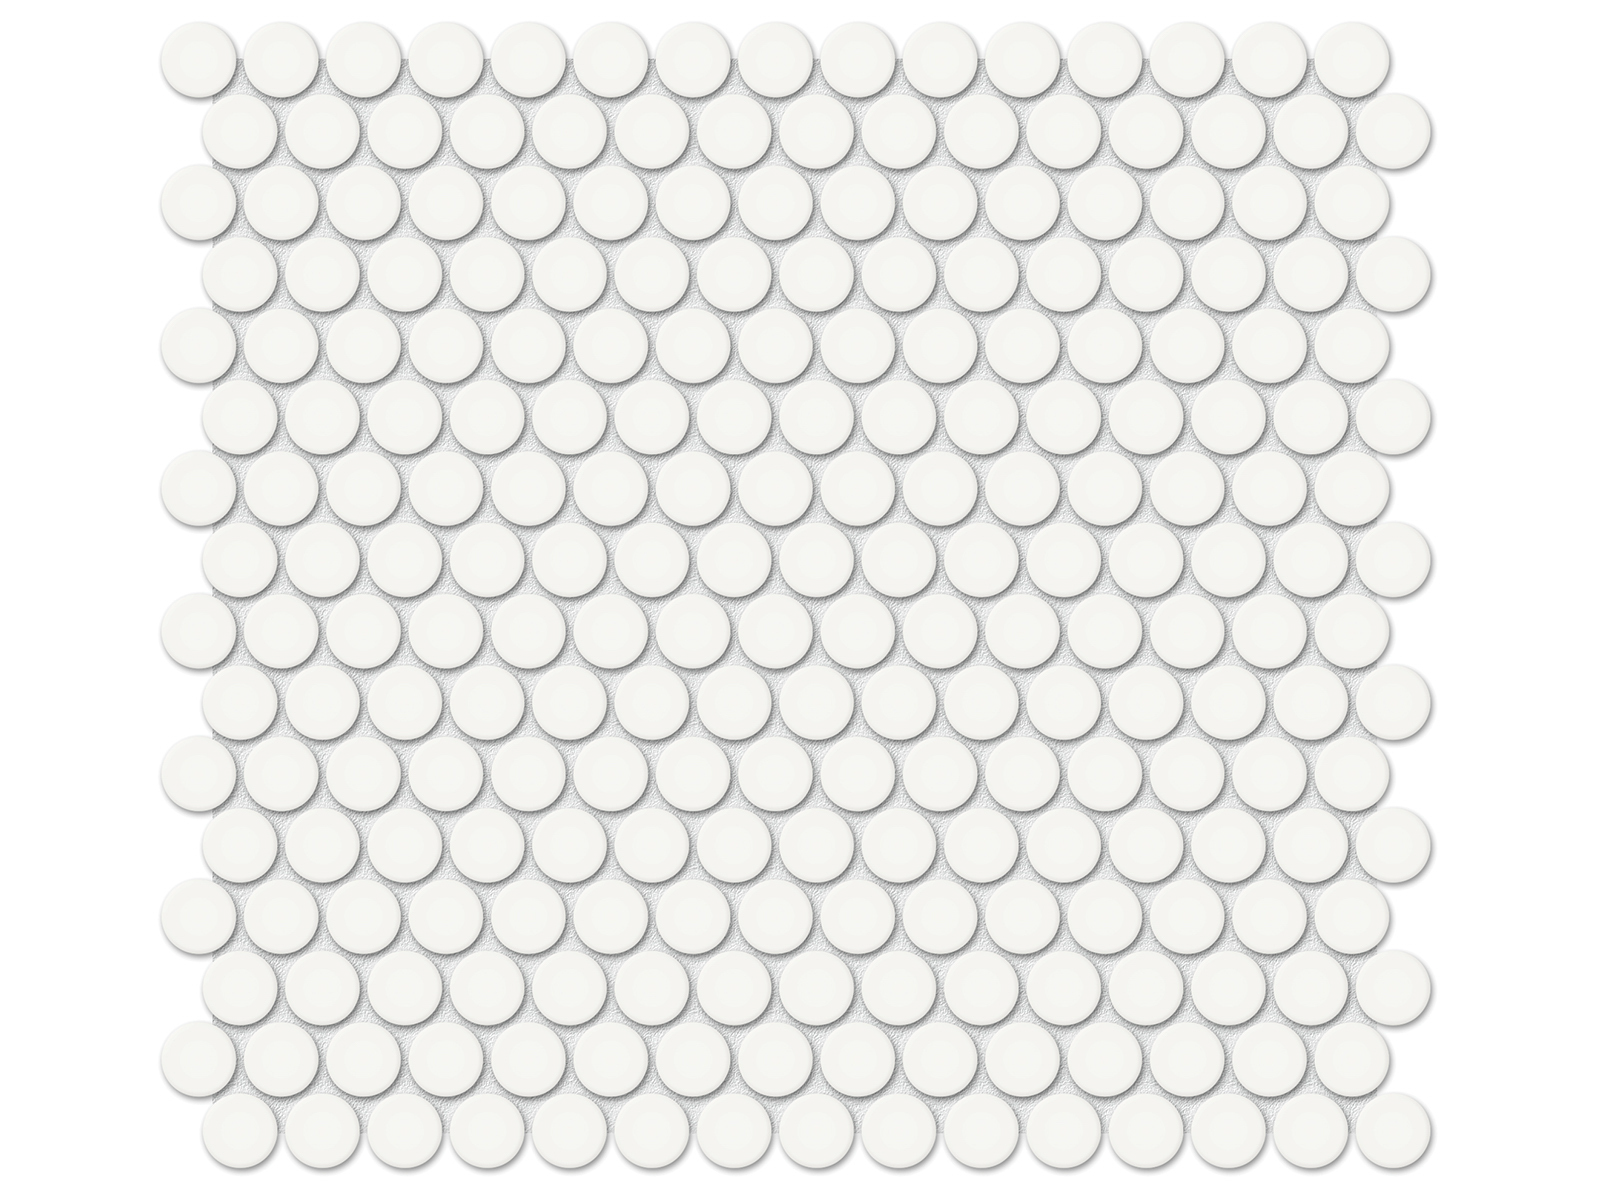 canvas white penny round 3_4-inch pattern glazed porcelain mosaic from soho anatolia collection distributed by surface group international matte finish pressed edge mesh shape